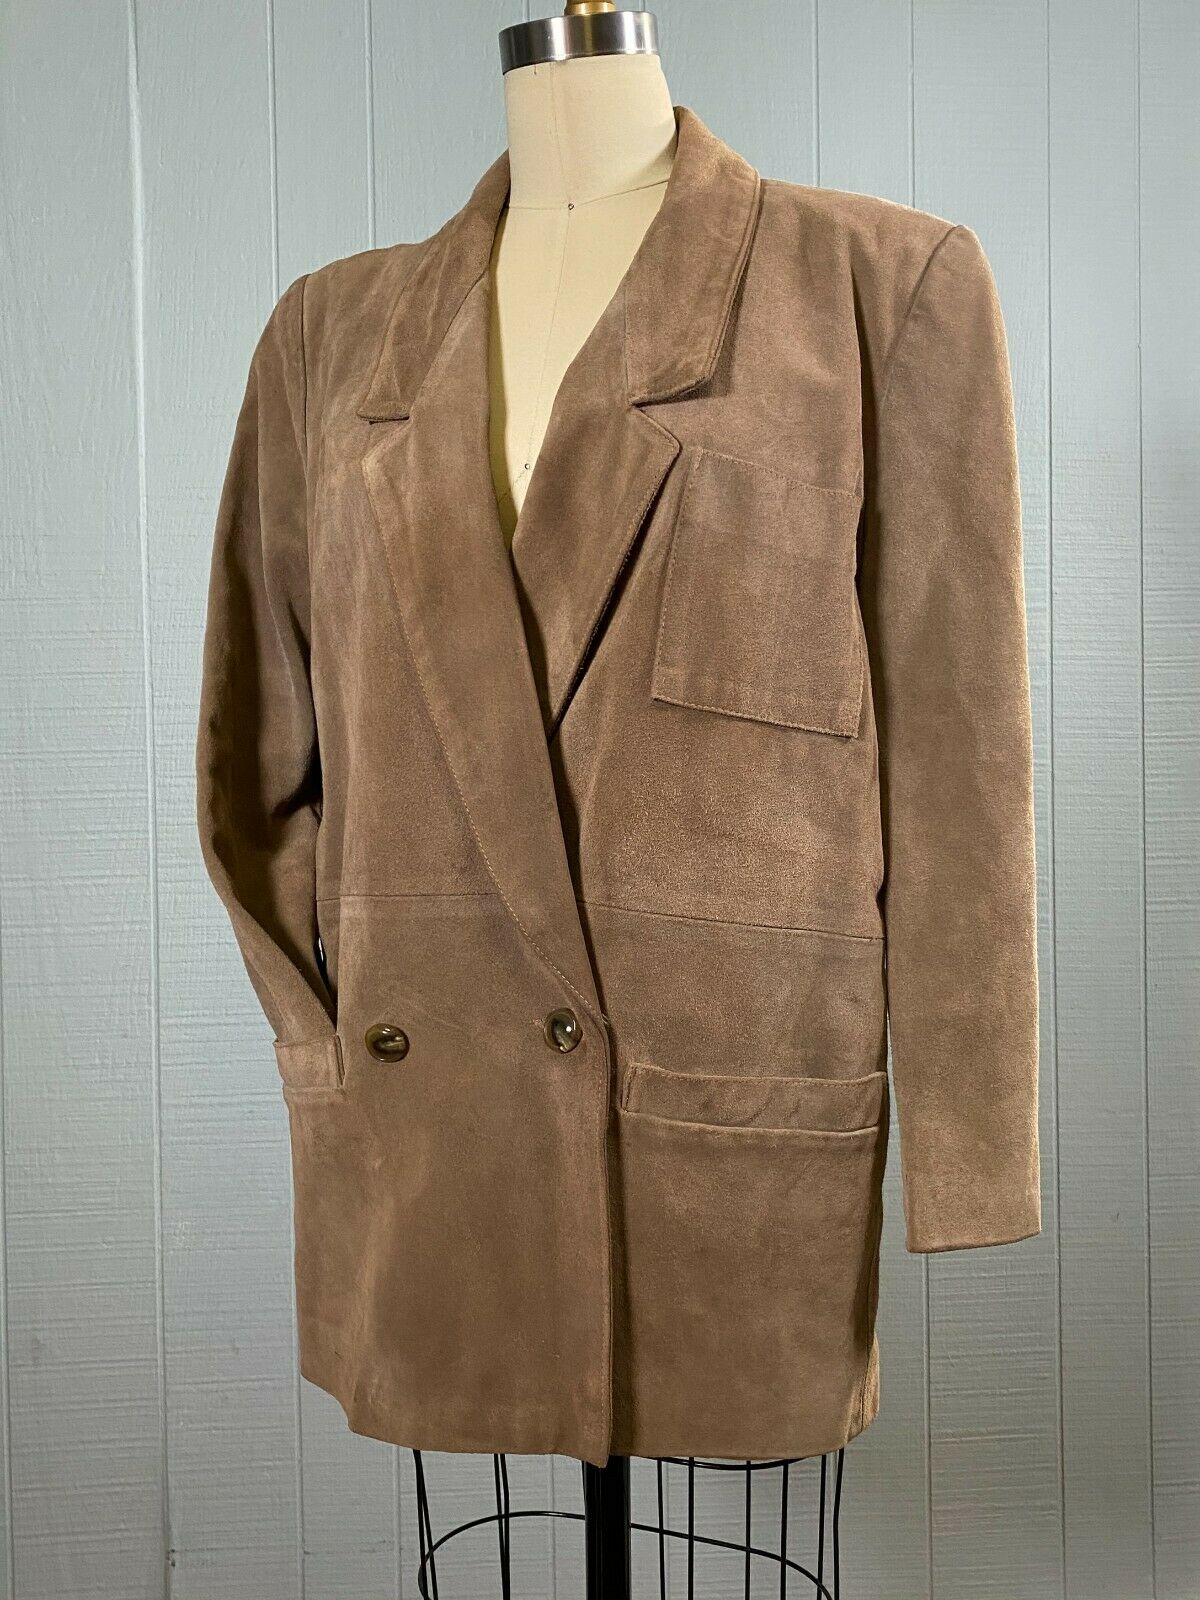 80's Double Breasted Tan Suede Jacket | M